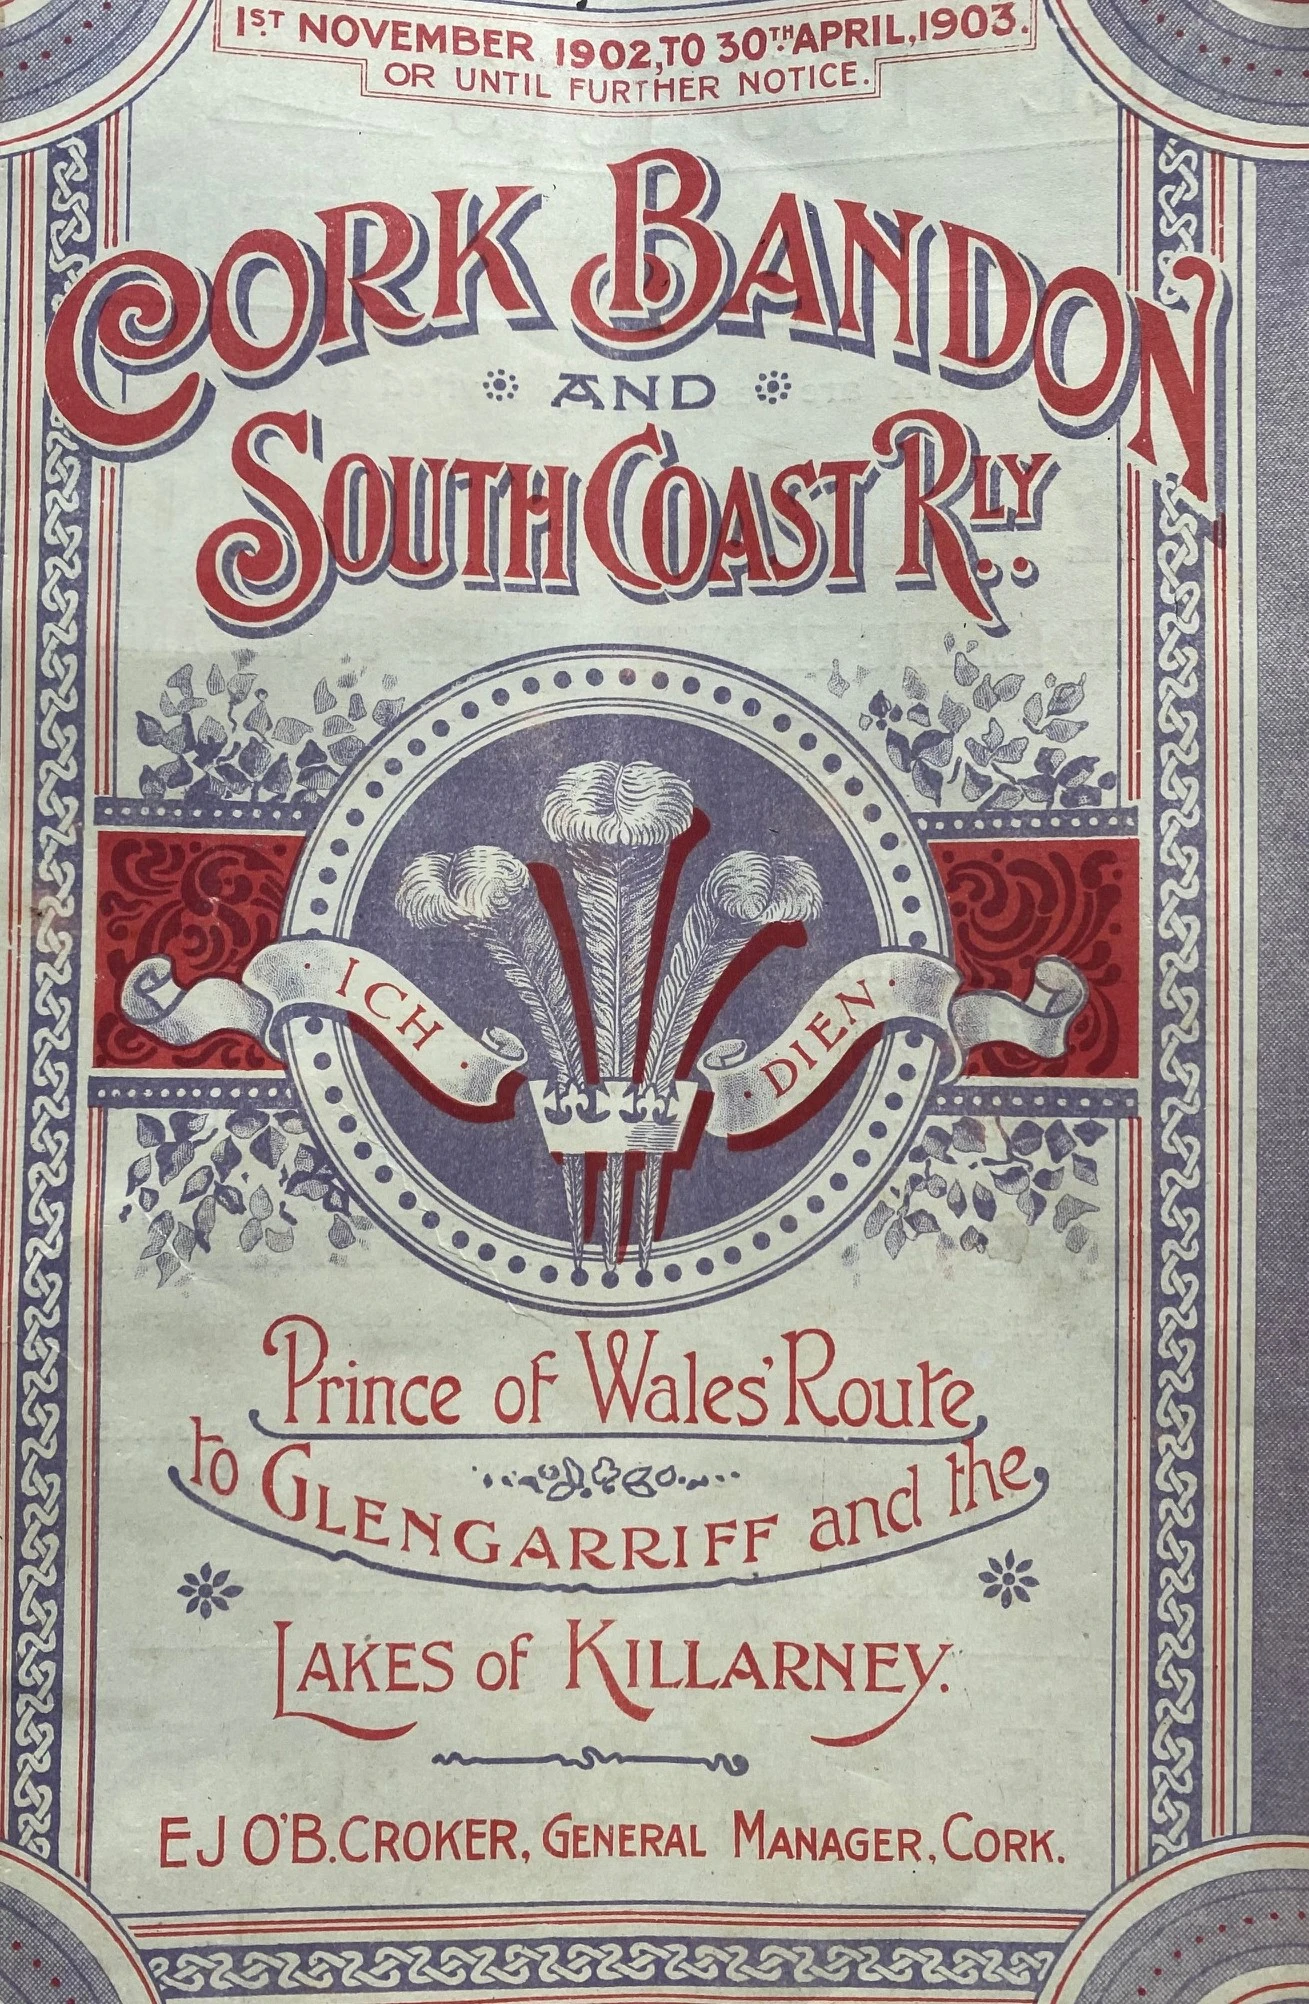 Cork Bandon & South Coast Railway – Prince of Wales Route – Poster